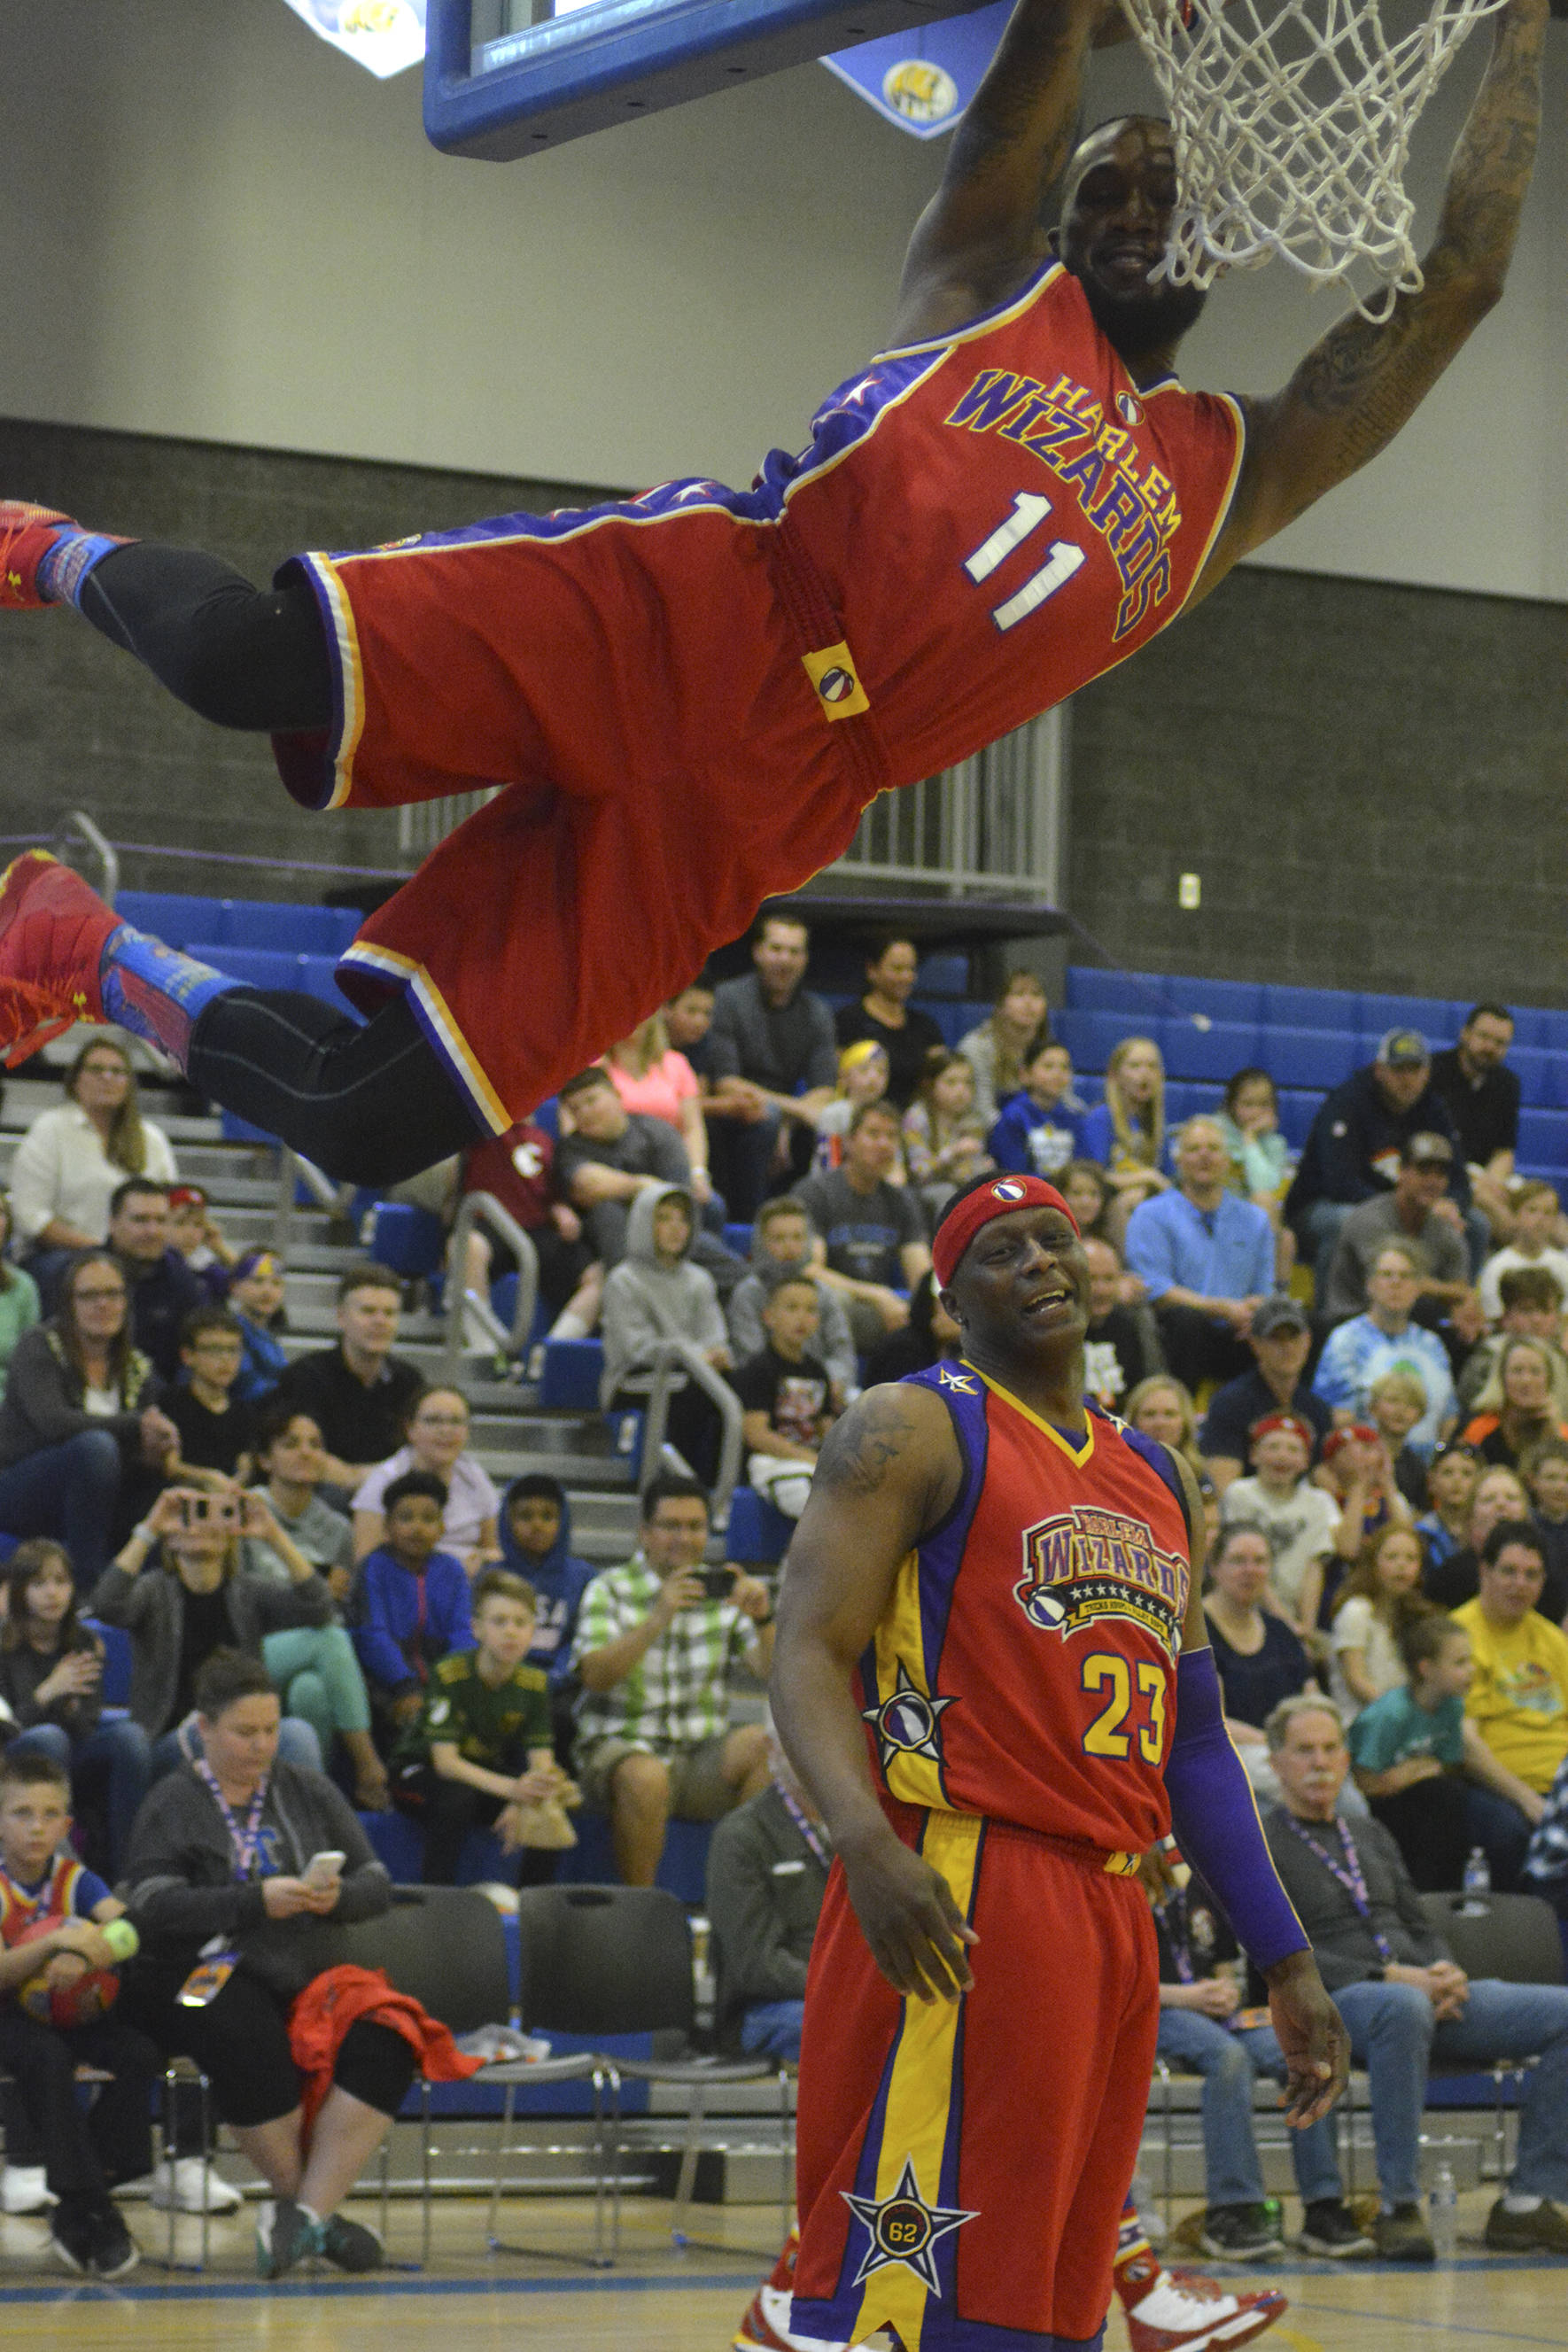 A Harlem Wizards player slam dunks a basketball during the fundraising event on May 3 at Tahoma High School. Photo by Kayse Angel